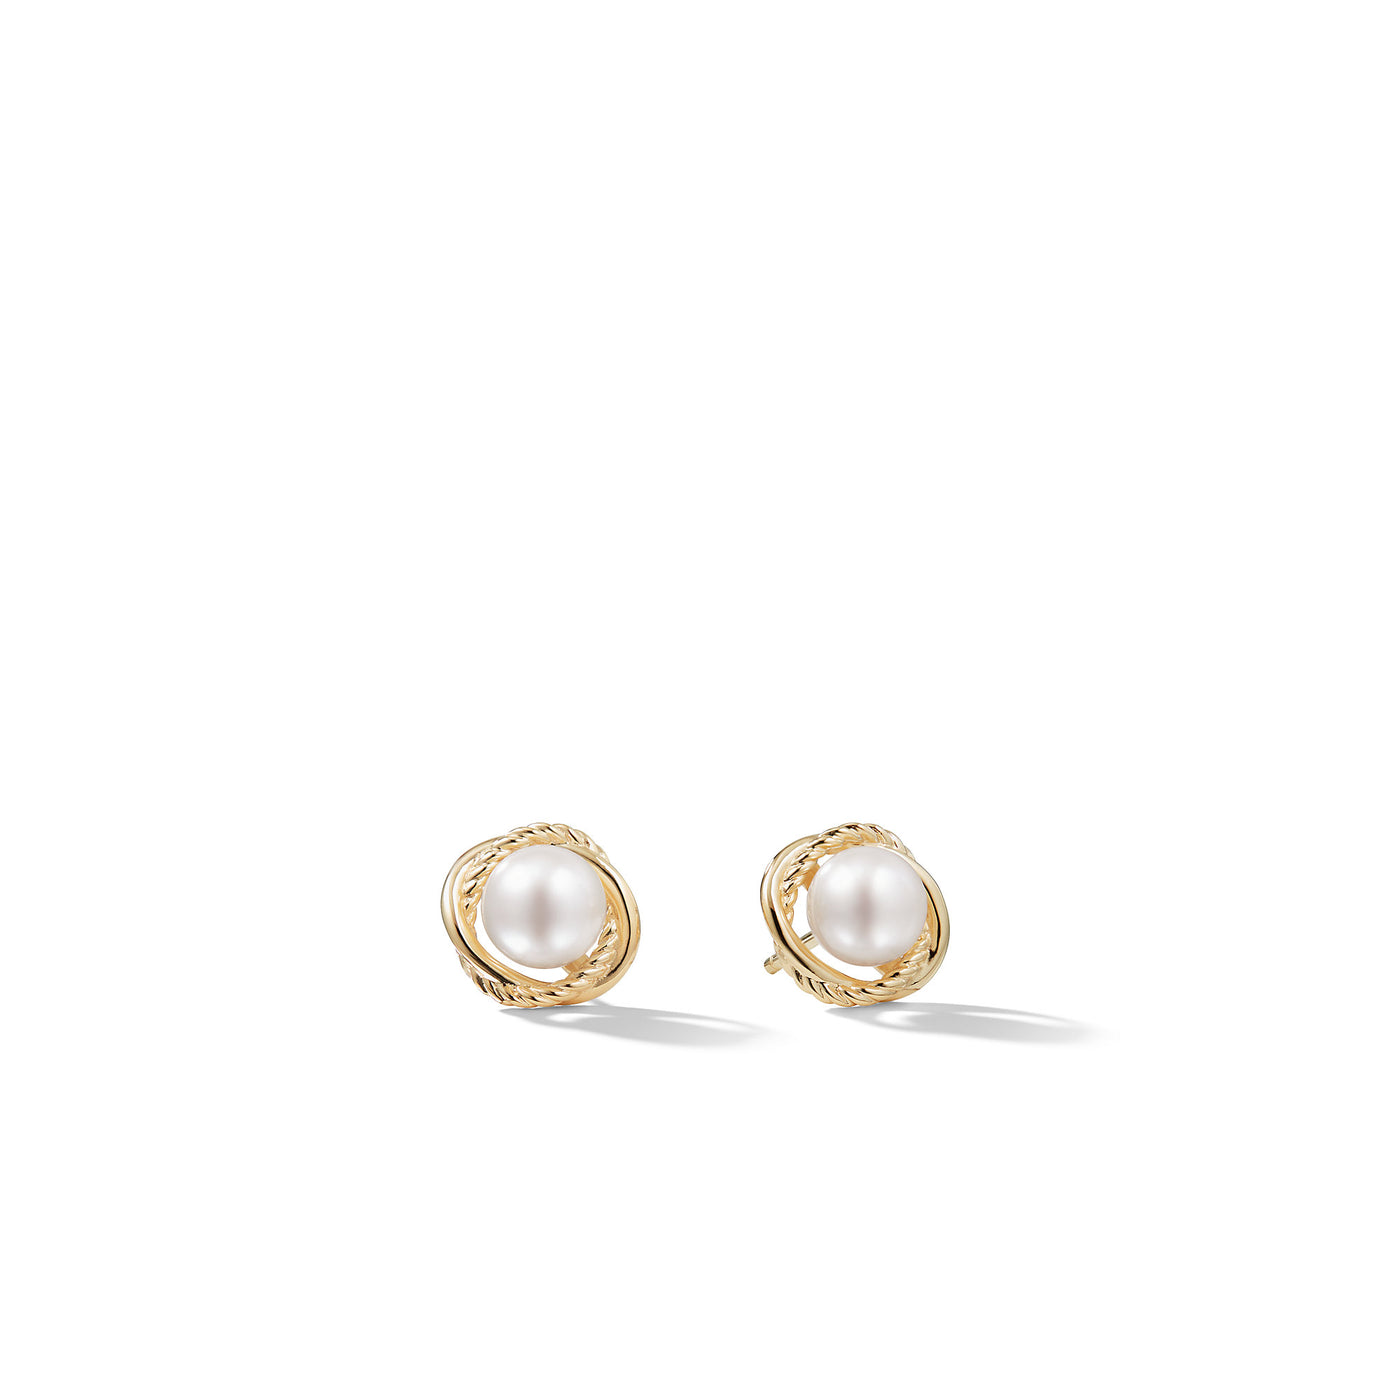 Crossover Infinity Pearl Stud Earrings in 18K Yellow Gold with Pearls\, 10mm